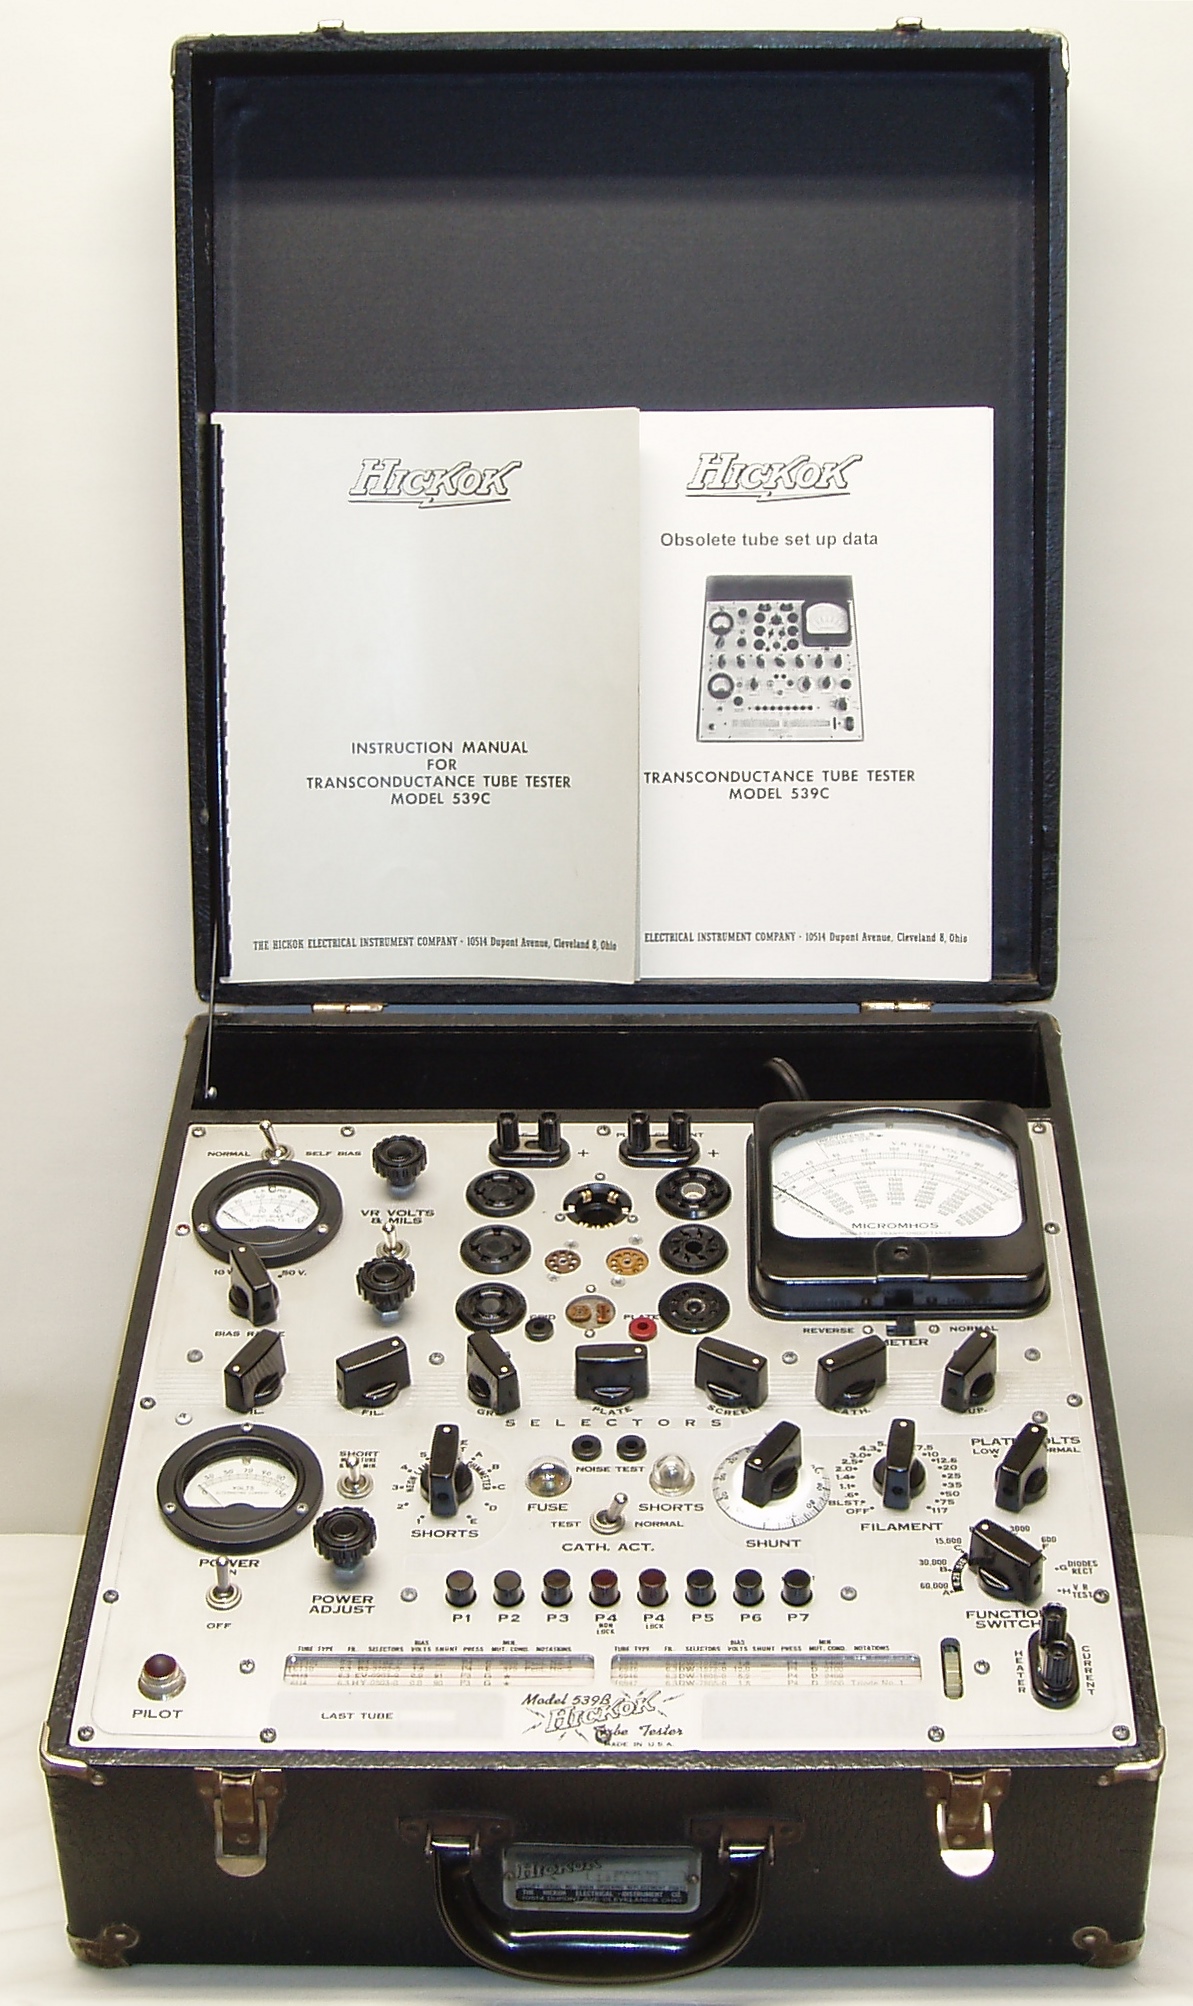 Vintage Tube Tester Gallery For Sale And Reference